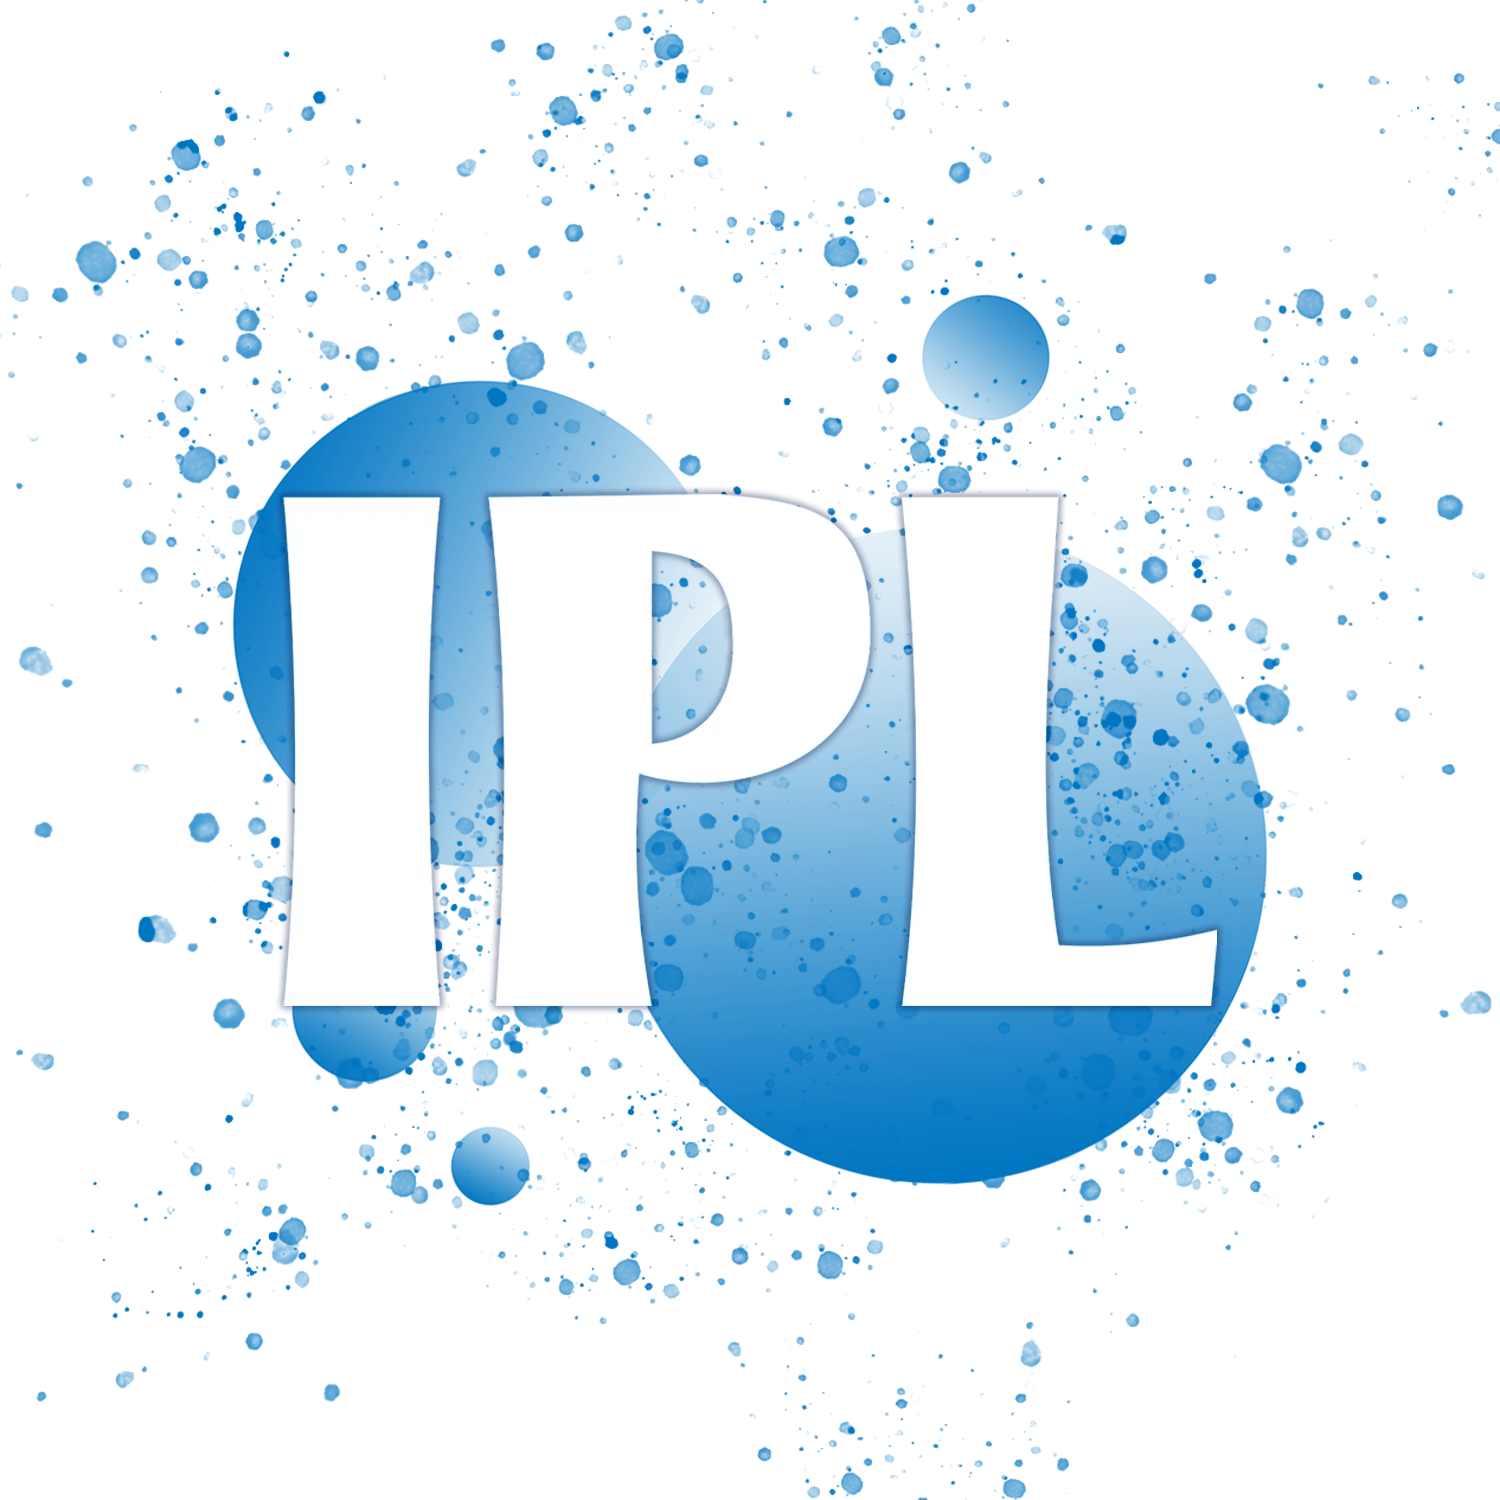 IPL is one of the most important events of cricket sport in India.